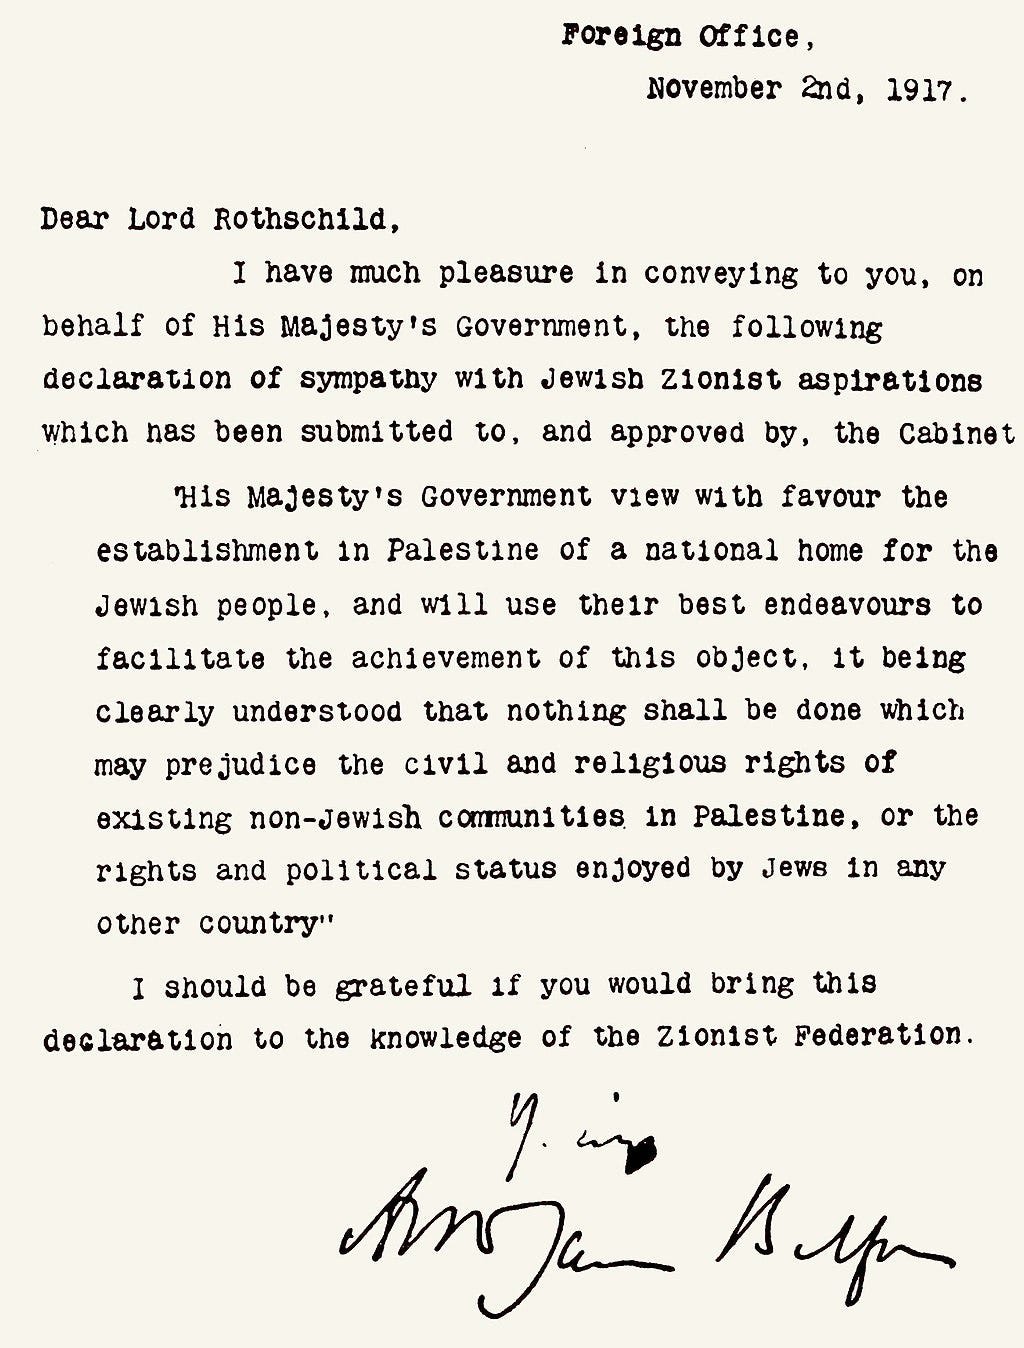 A copy of the letter from Prime Minister Balfour to Lord Rothschild on the declaration of a Jewish state in Mandatory Palestine